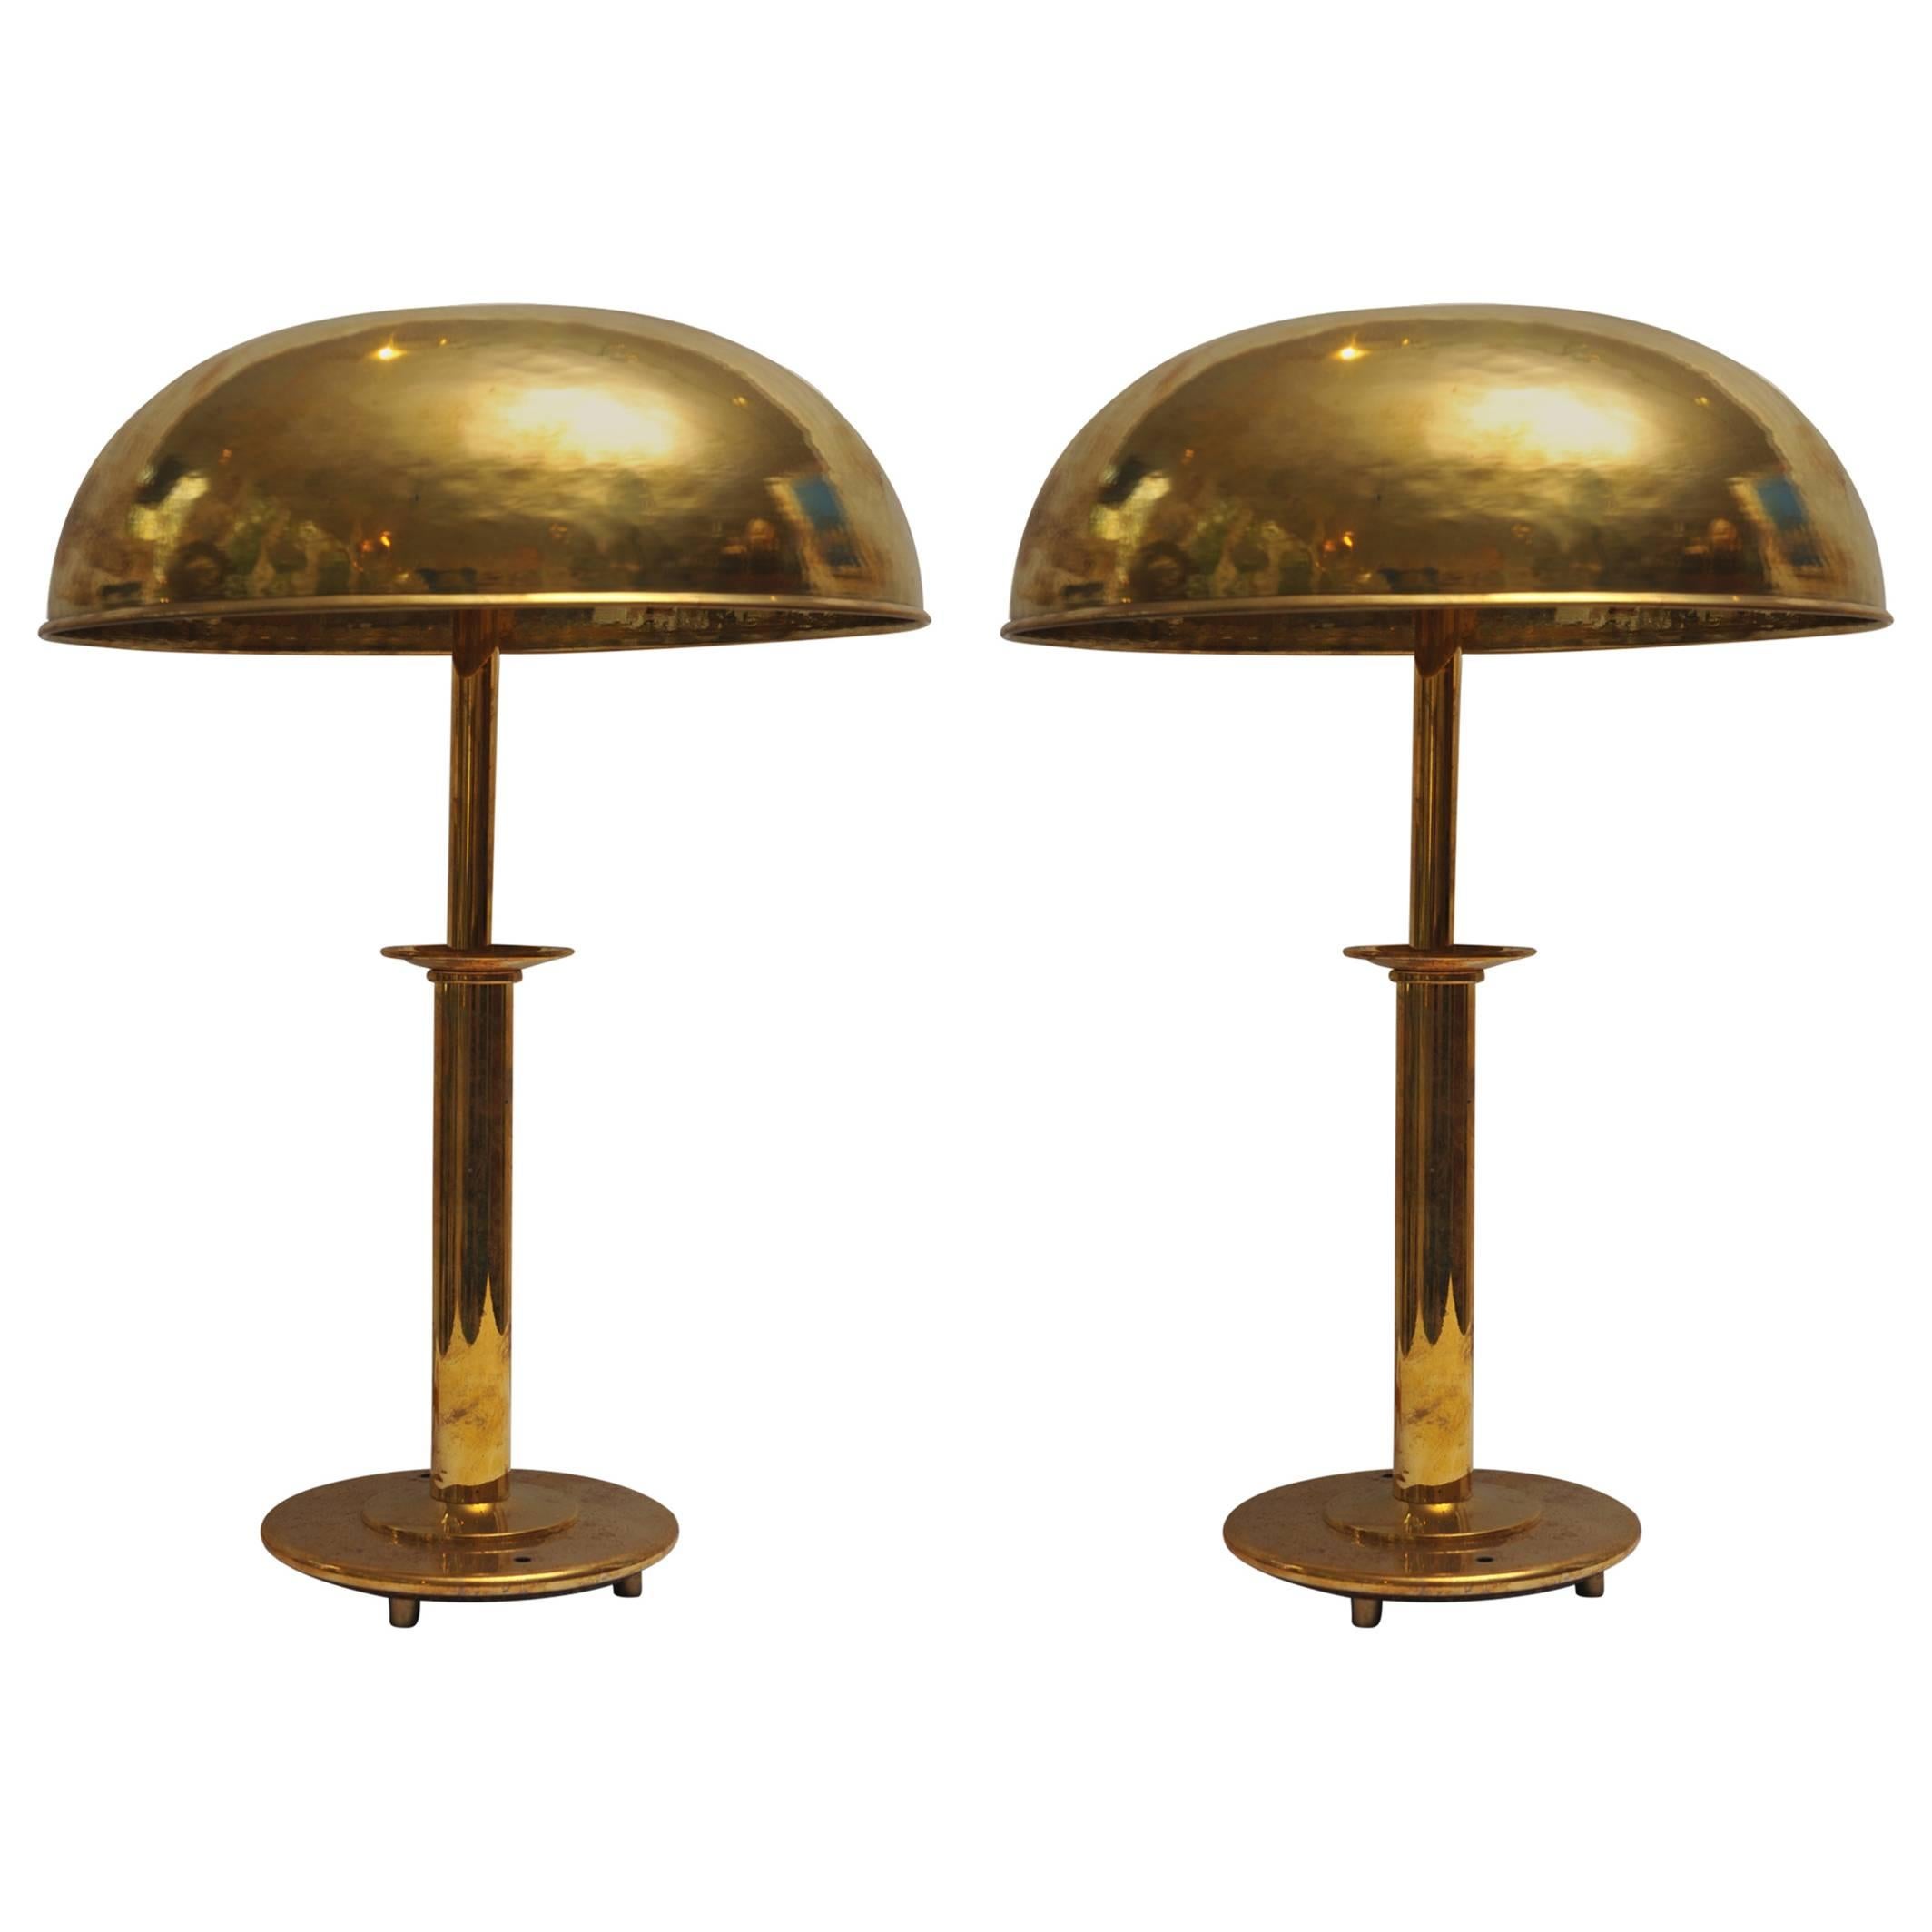 Pair of Mid-Century Modern Nautical Brass Table Lamps from Ship's Stateroom